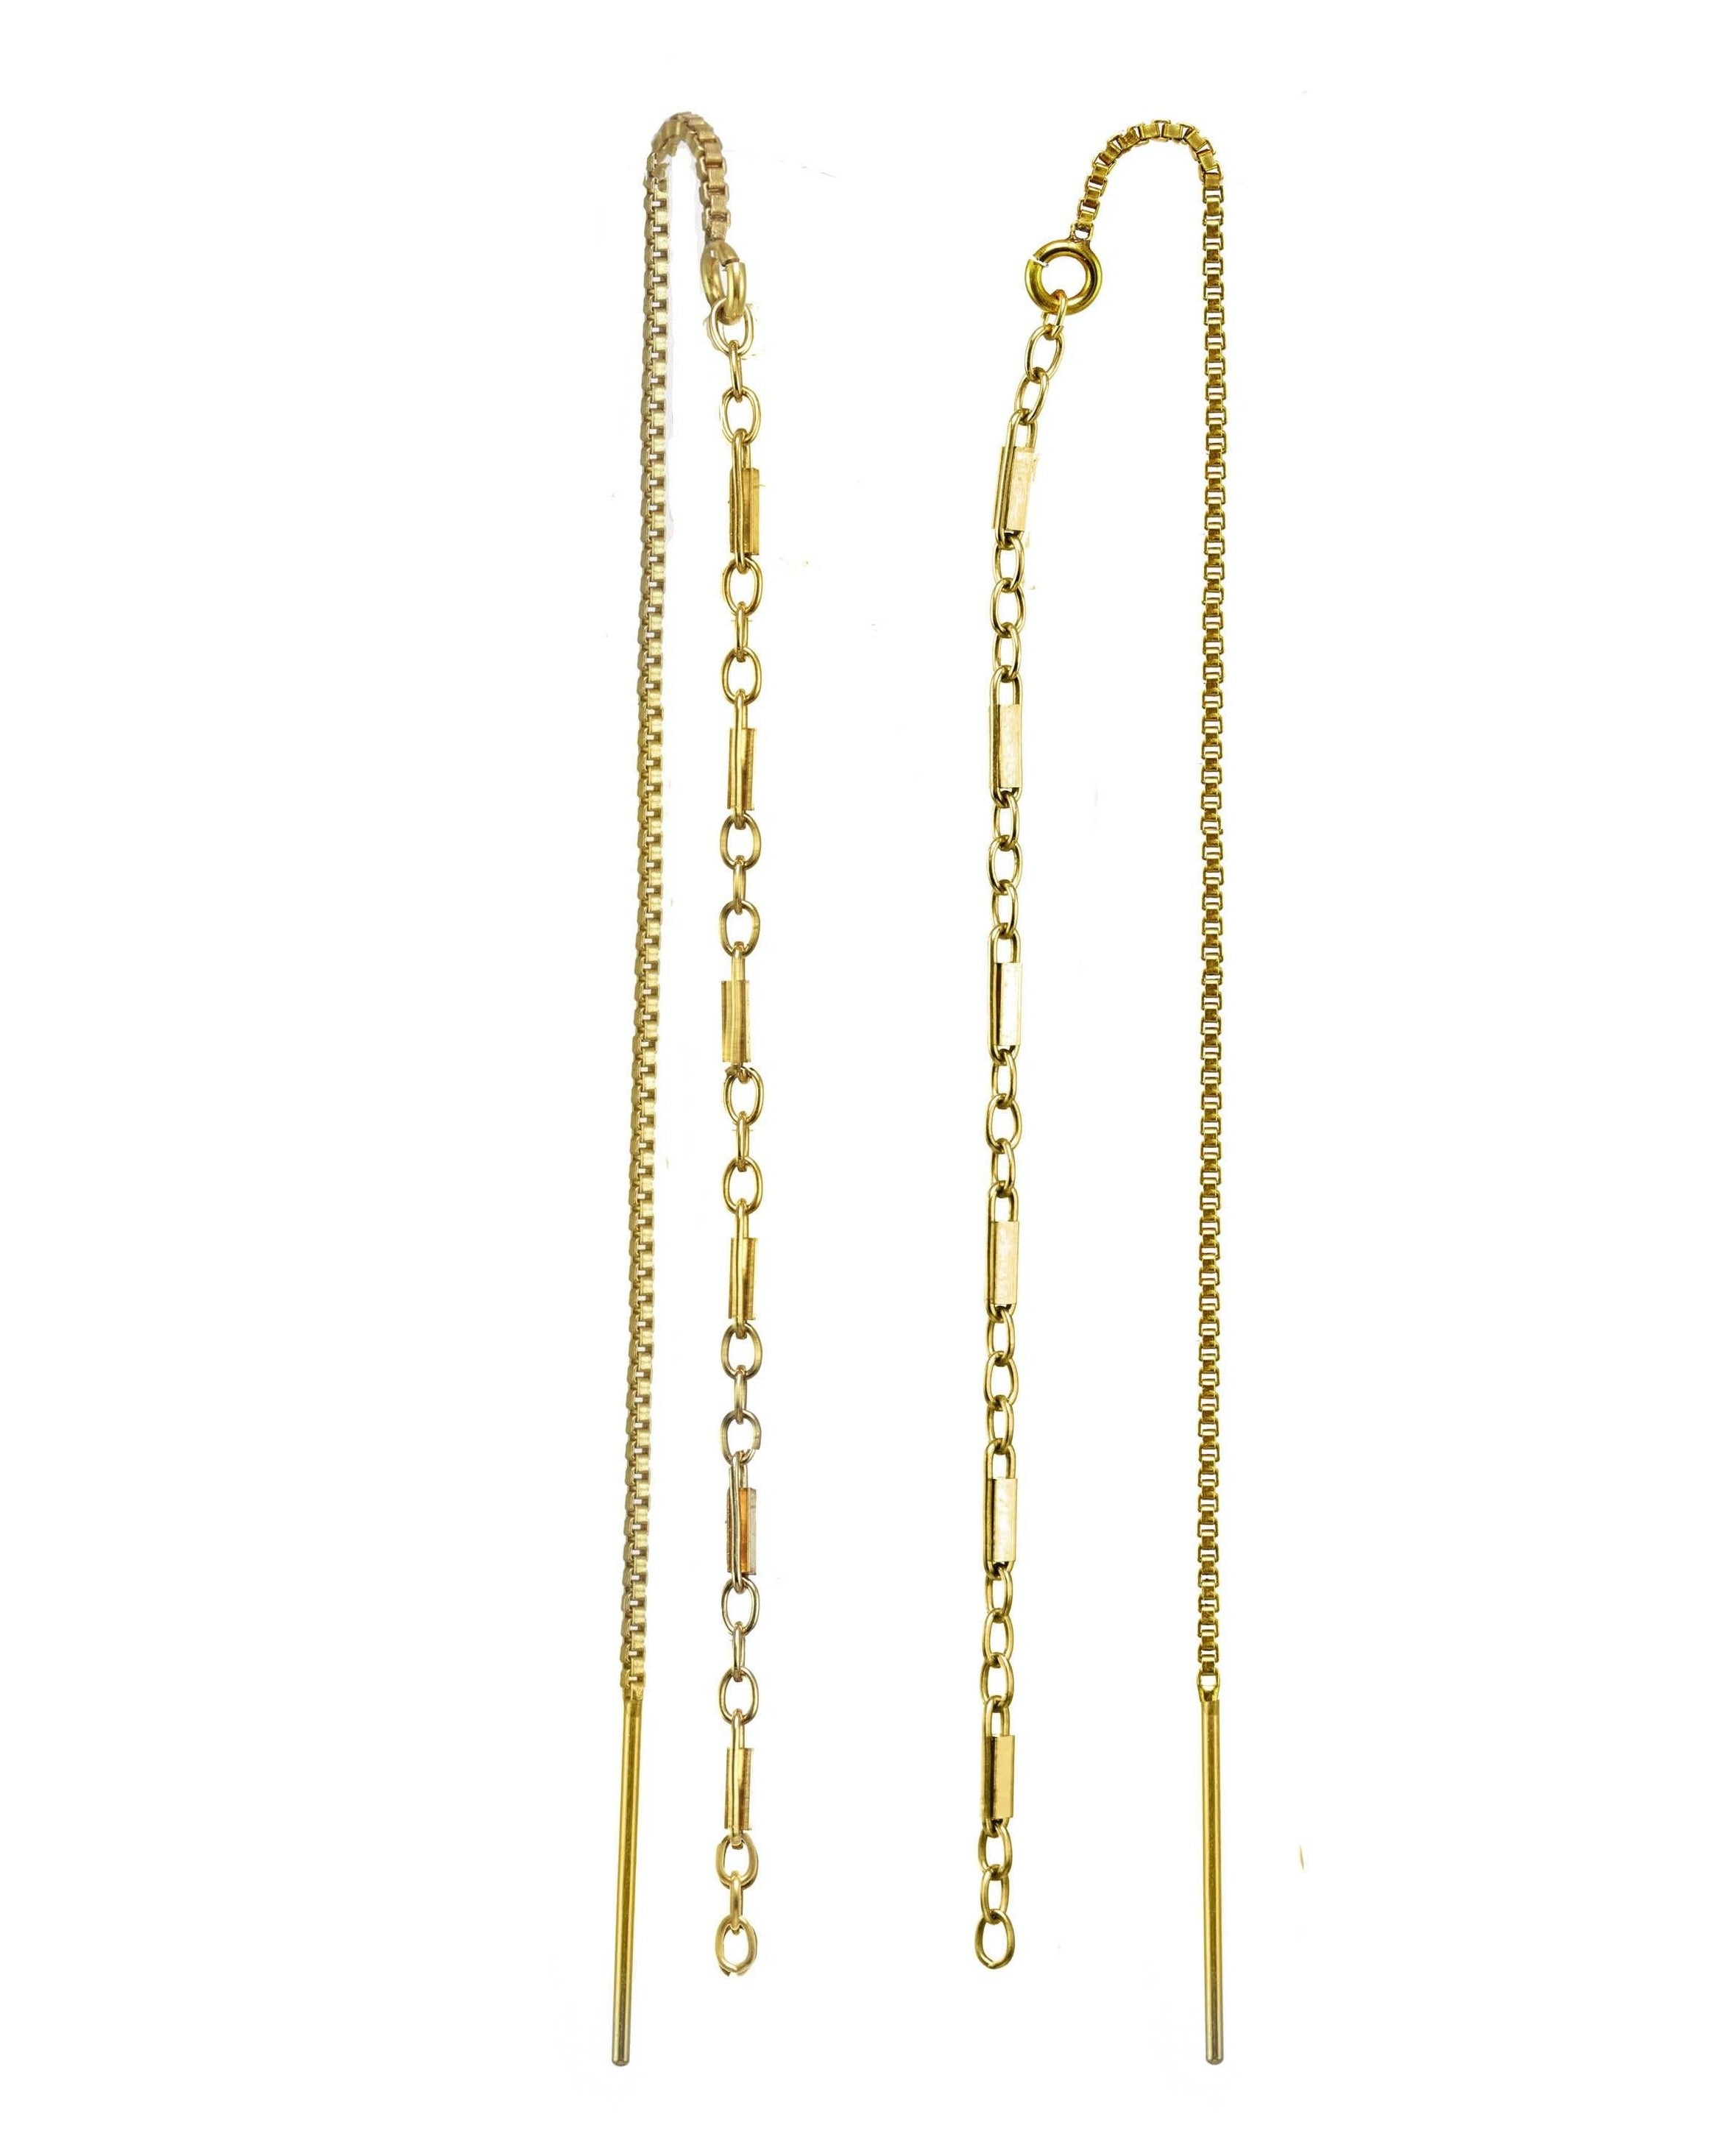 Nevaeh Threaders by KOZAKH. Threader style earrings with cylindrical link chain in front, box chain in back, and has a drop length of 2 inches on each side, crafted in 14K Gold Filled.